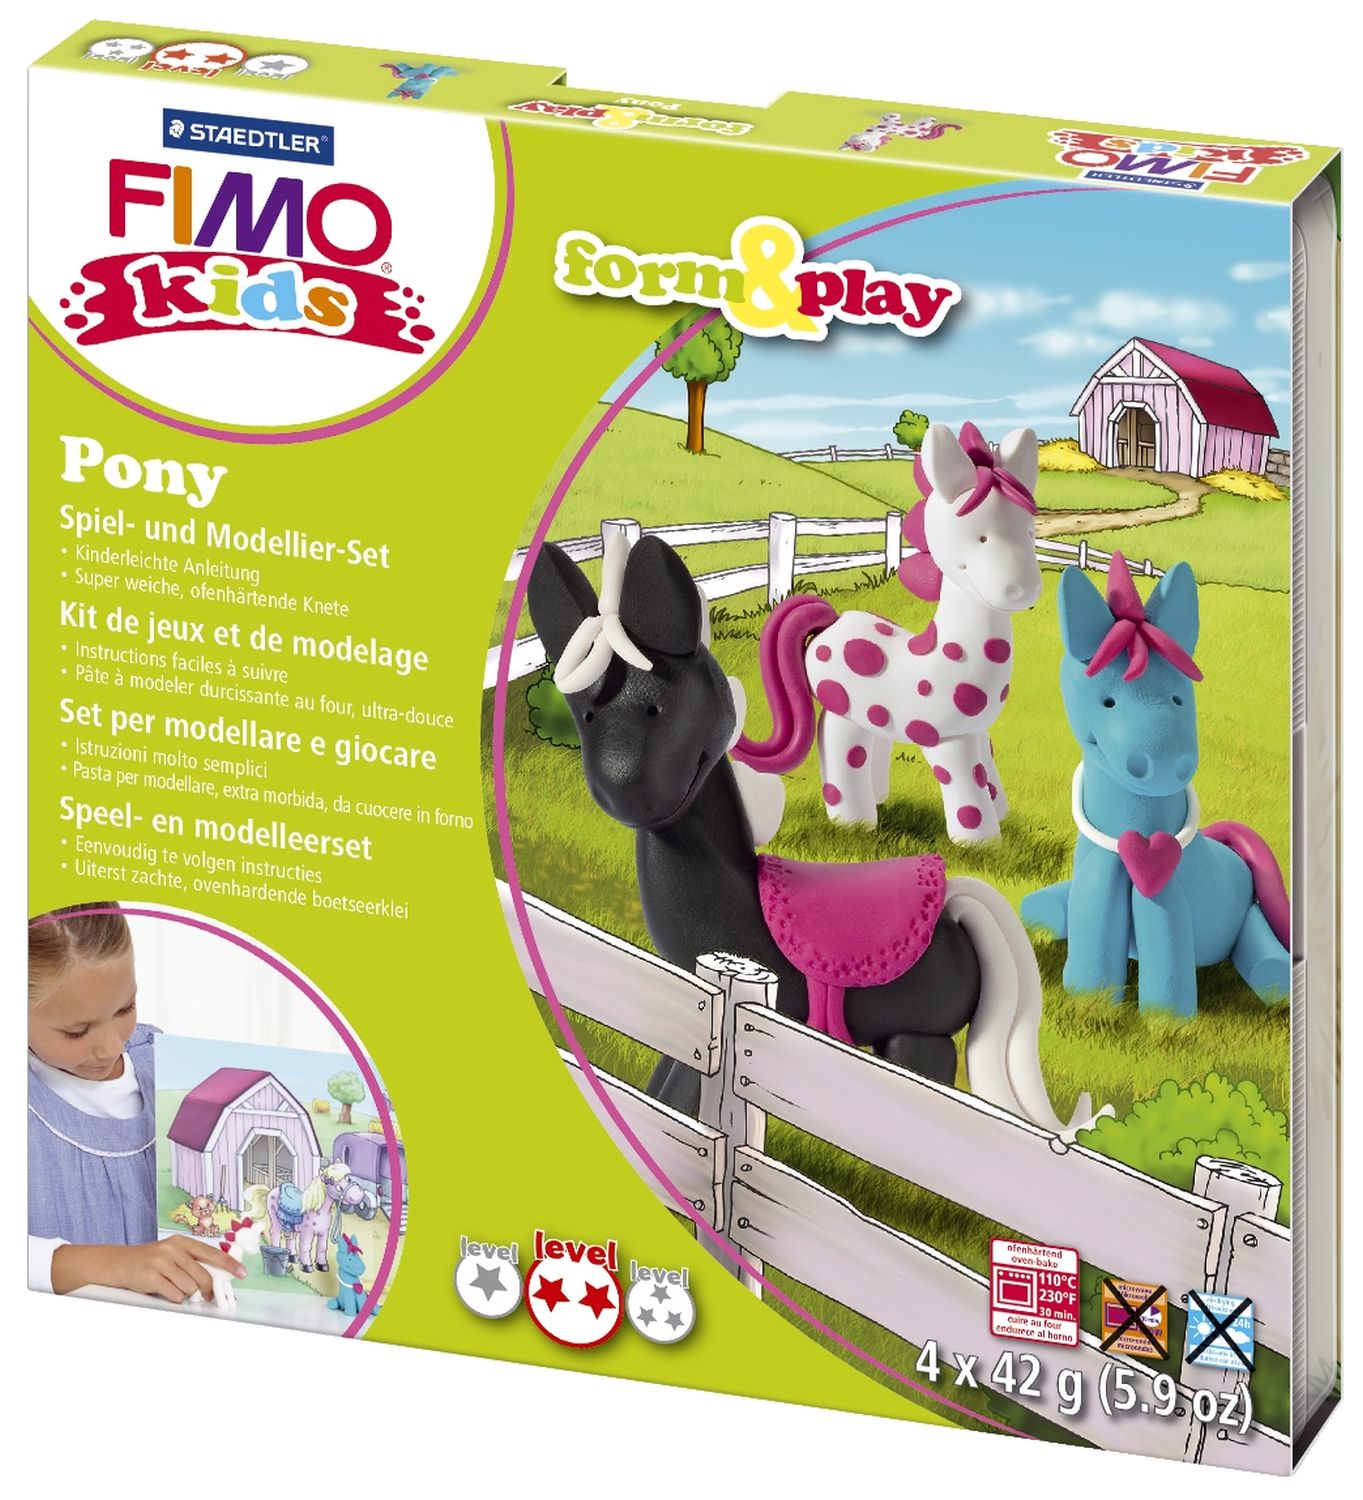 Modelliermasse FIMO® Kids Materialpackung Form & Play "Pony", 4 x 42 g